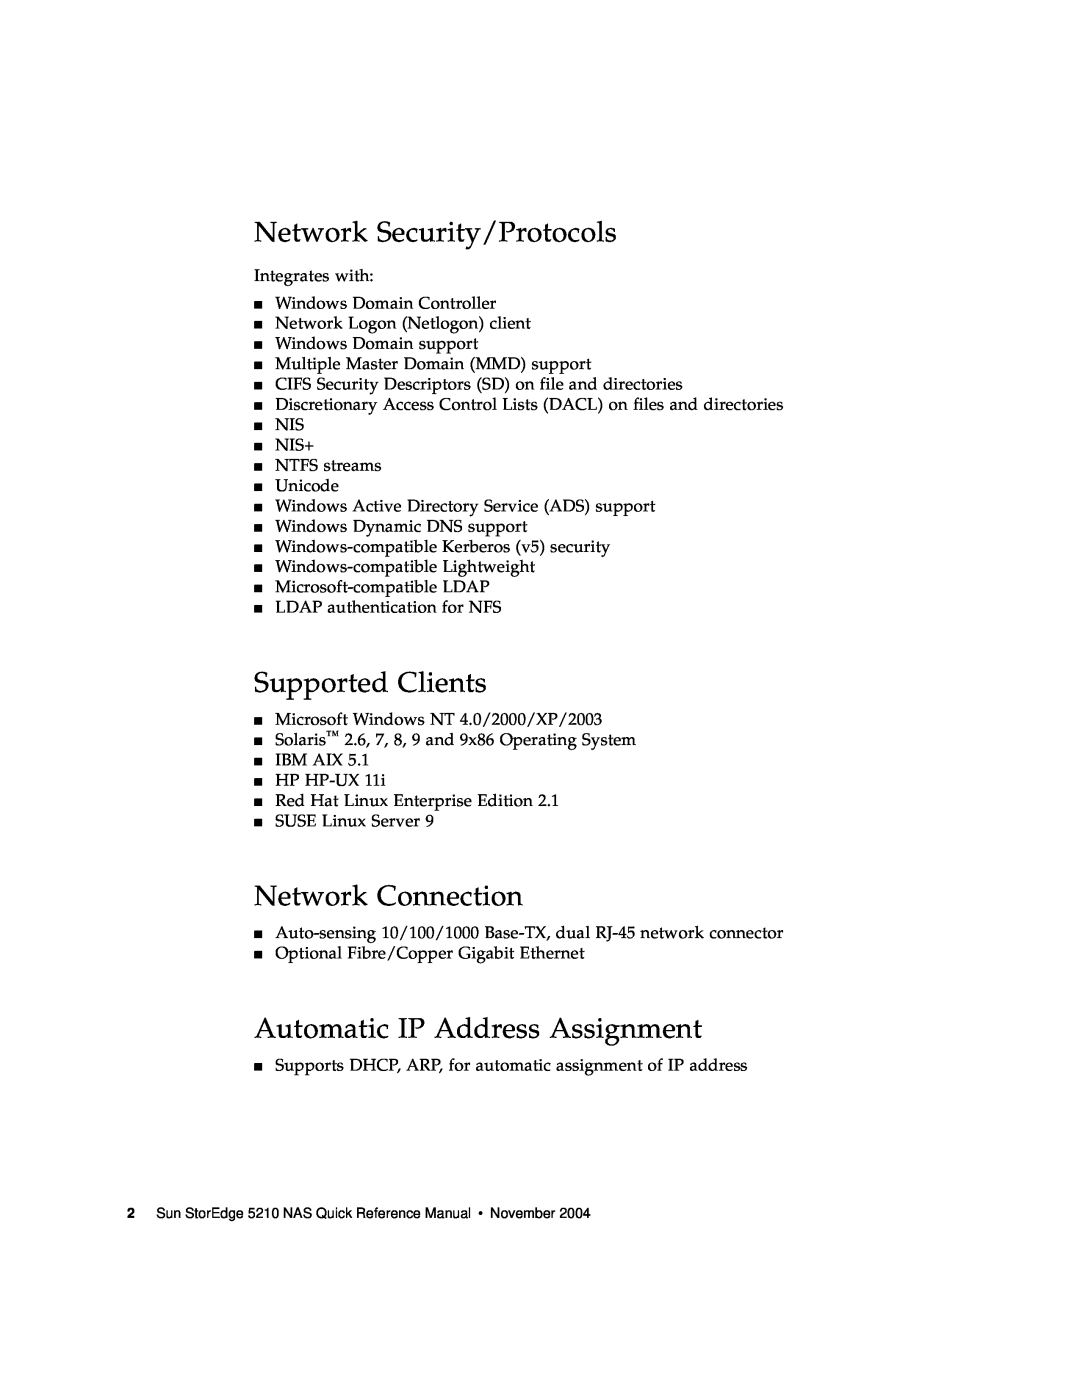 Sun Microsystems 5210 NAS manual Network Security/Protocols, Supported Clients, Network Connection 